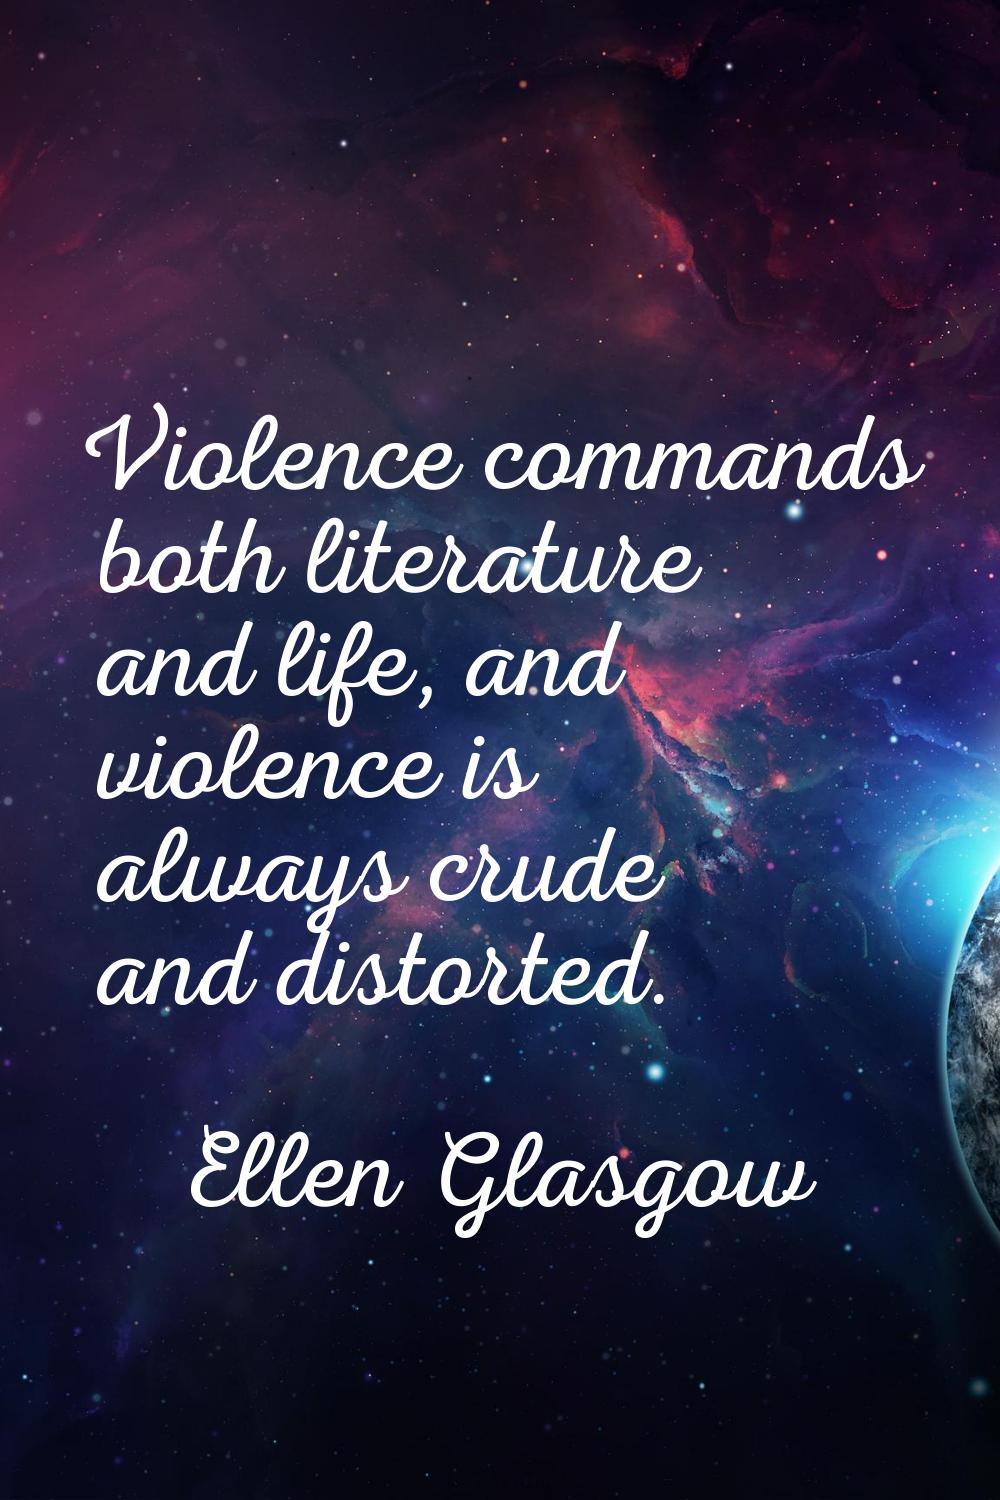 Violence commands both literature and life, and violence is always crude and distorted.